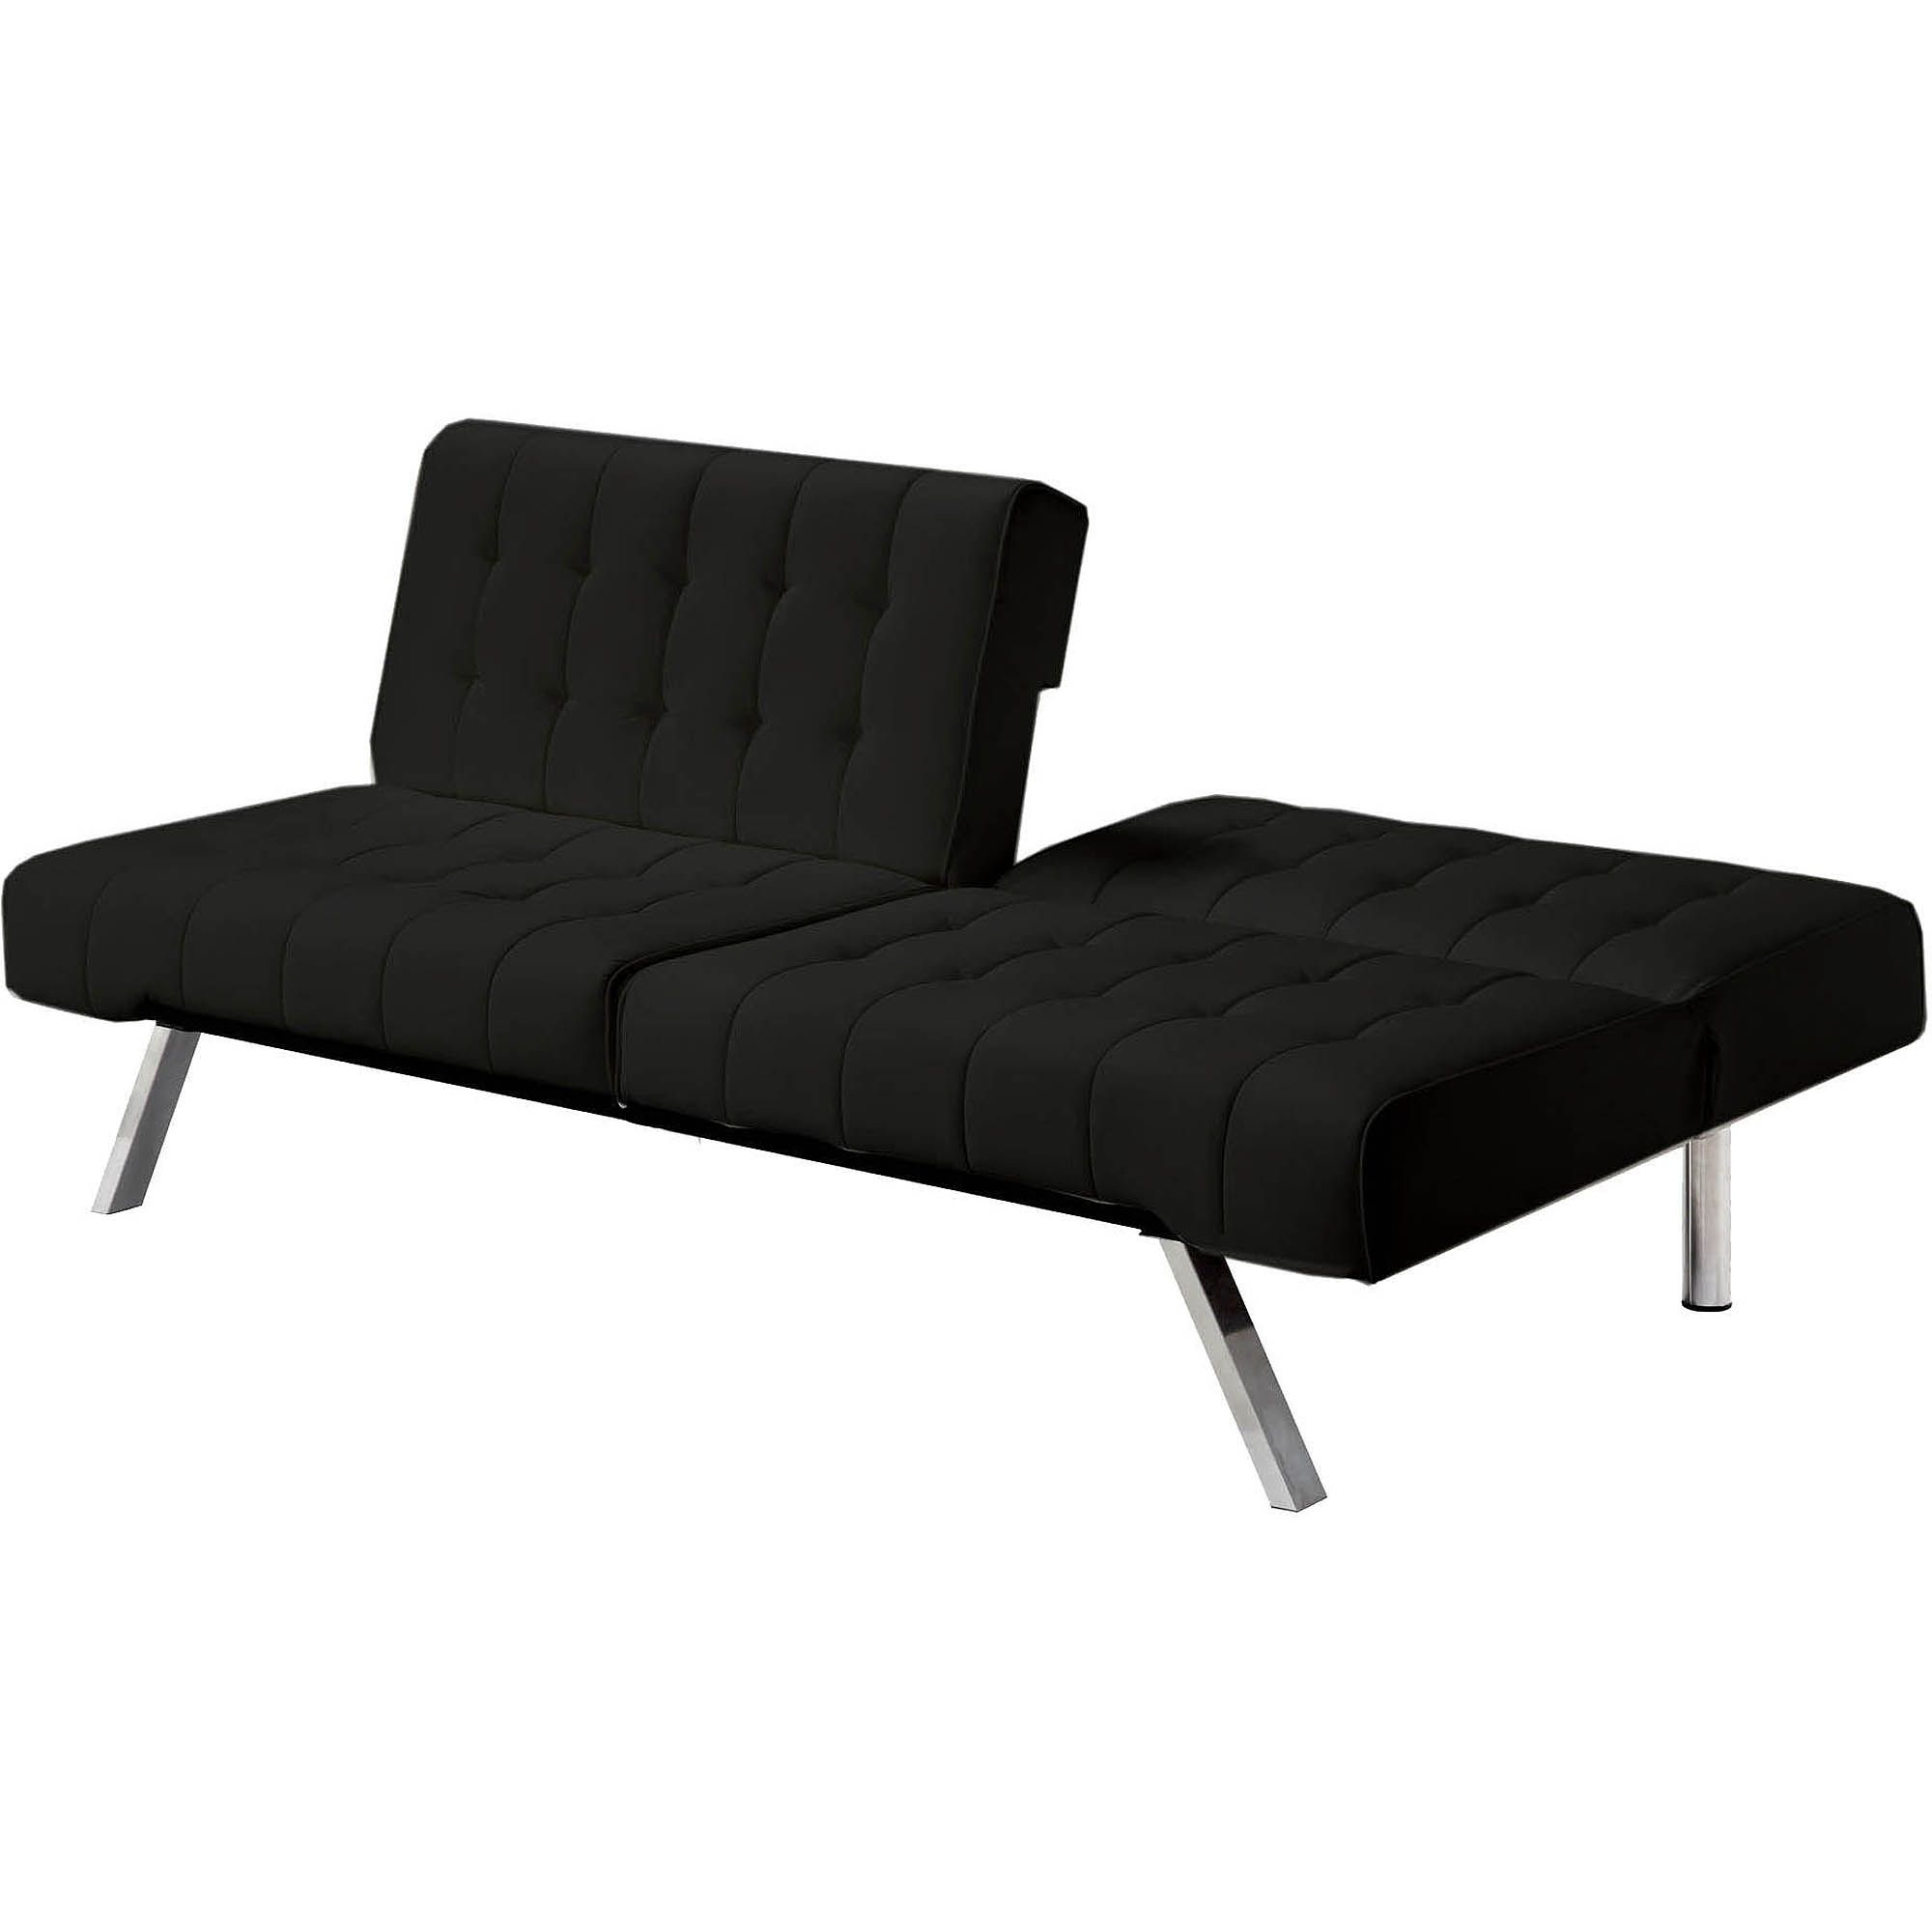 Emily Futon Chaise Loungers For Fashionable Choice (View 15 of 15)